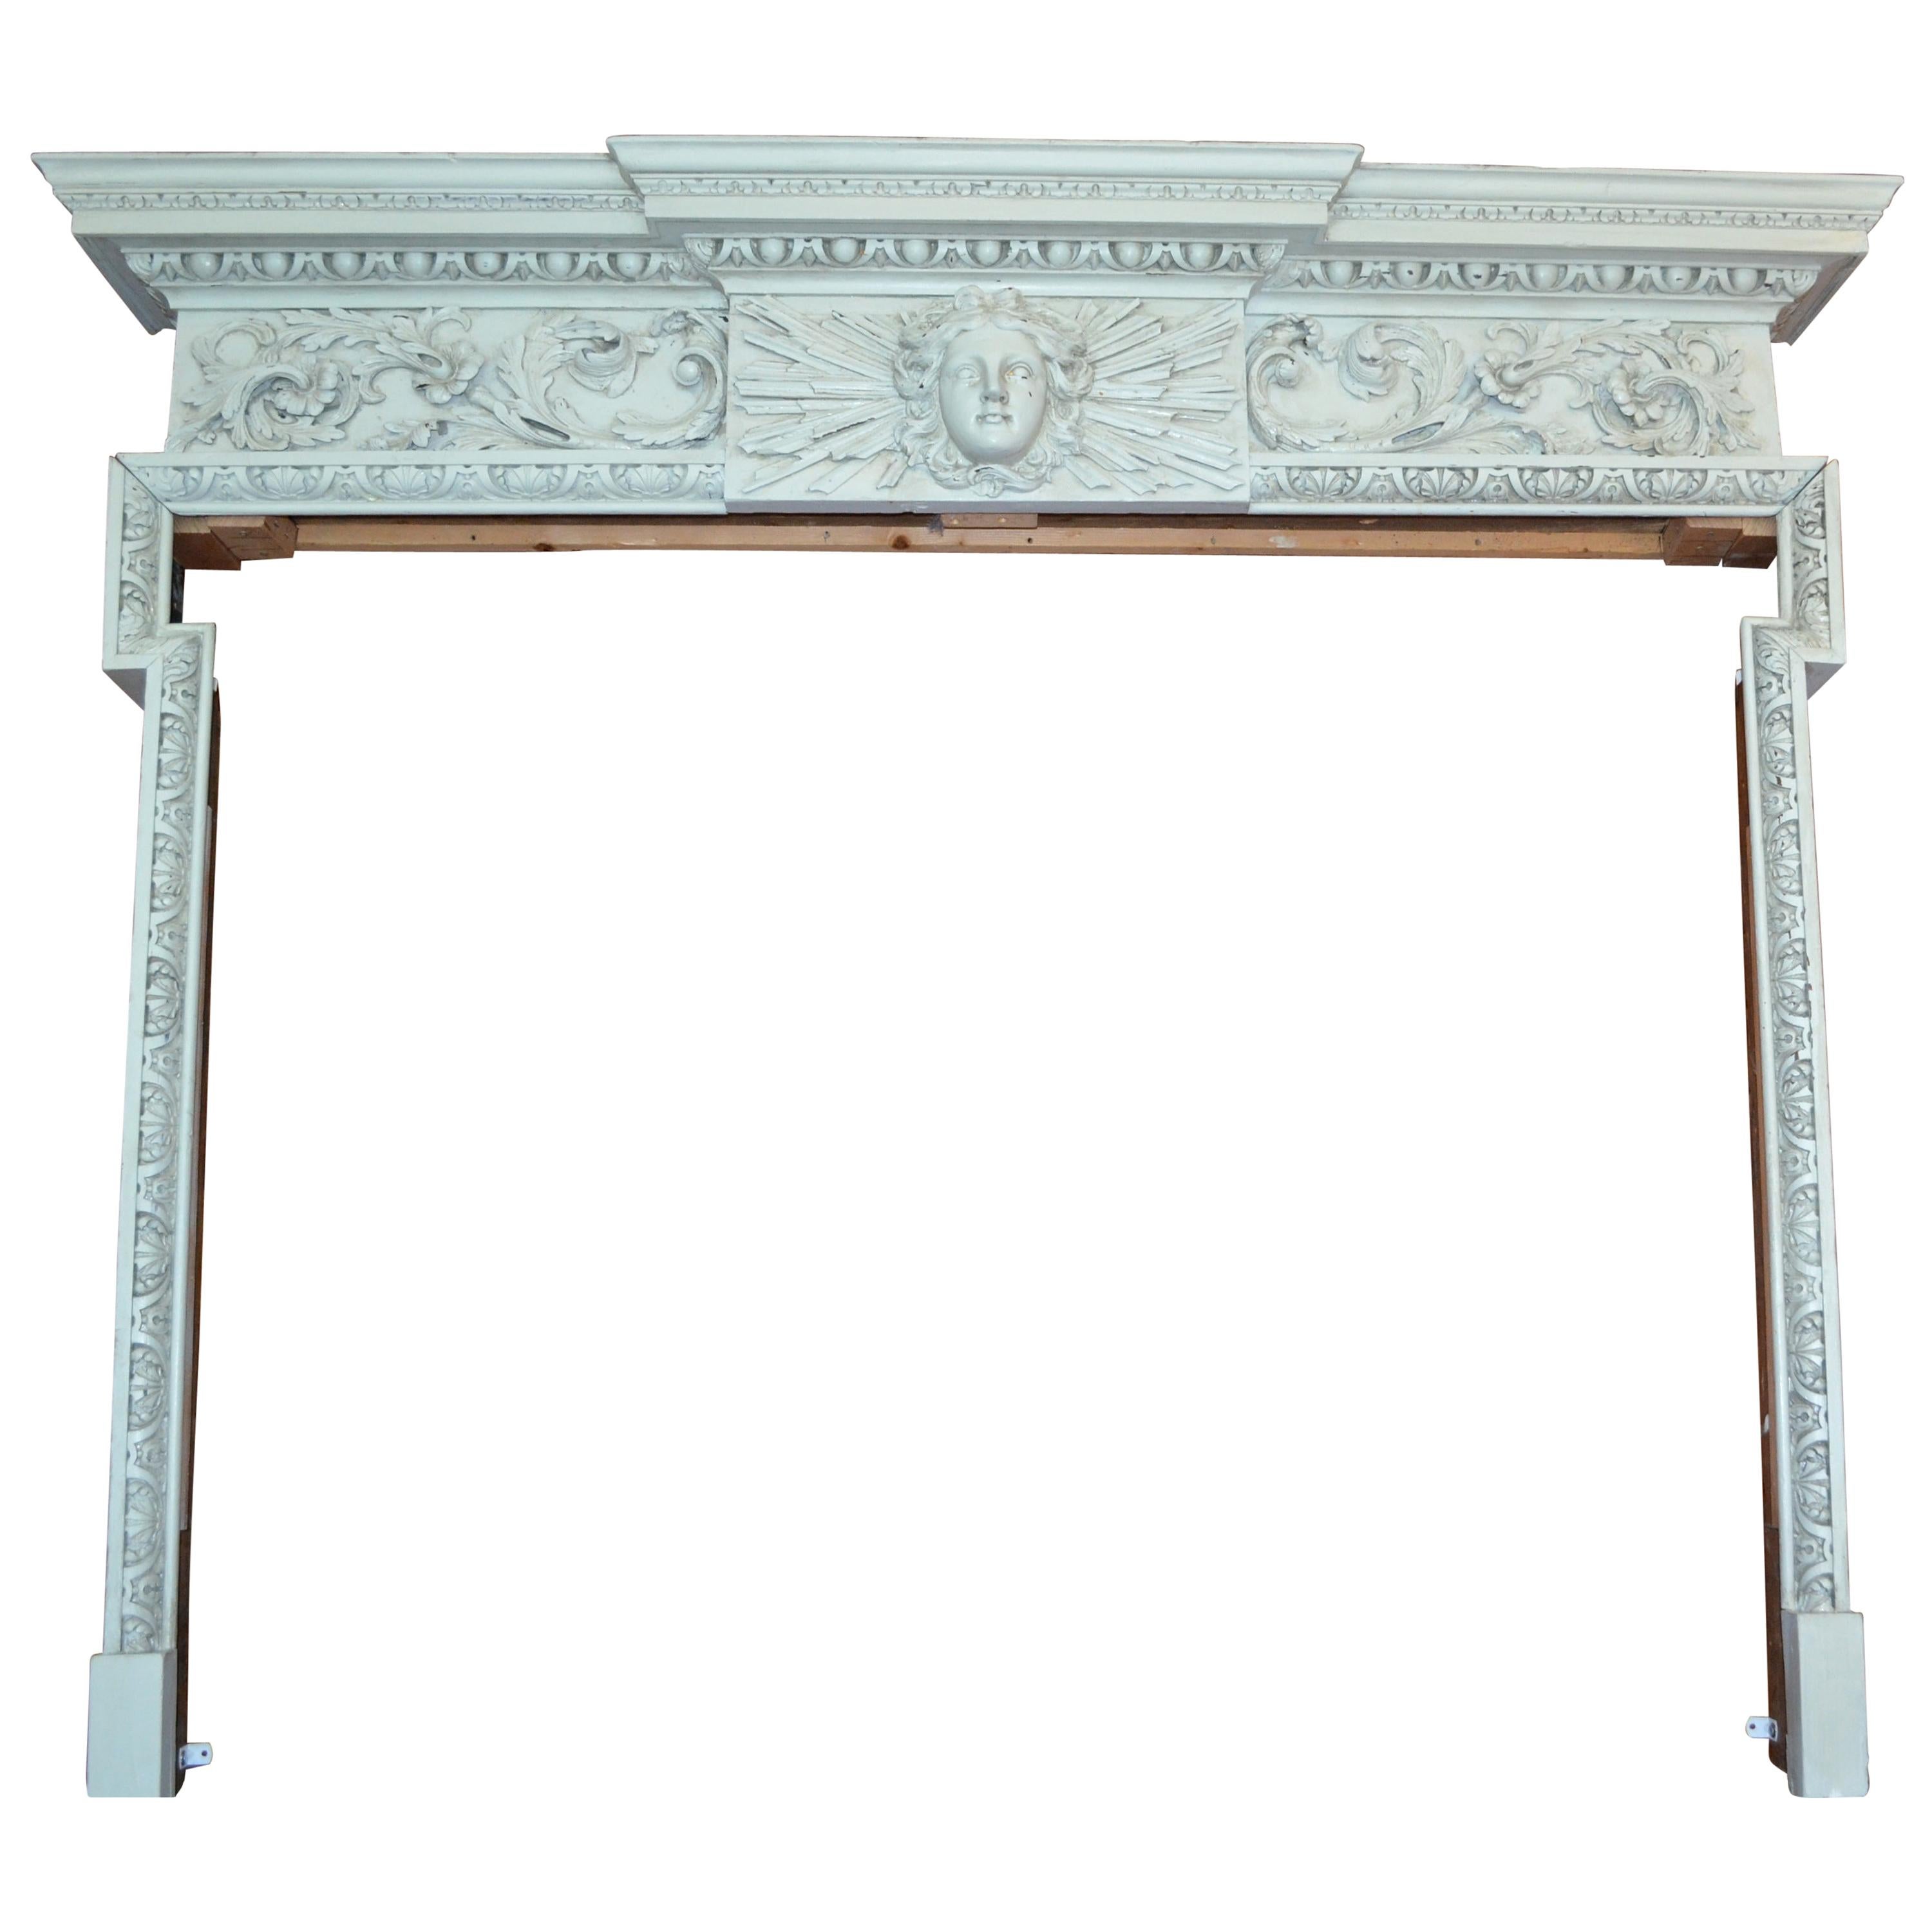 A painted pinewood id 18 century fireplace or chimneypiece surround with deep finely carved cushion frieze and a dramatic Louis XIV sunburst at the centre of frieze.

